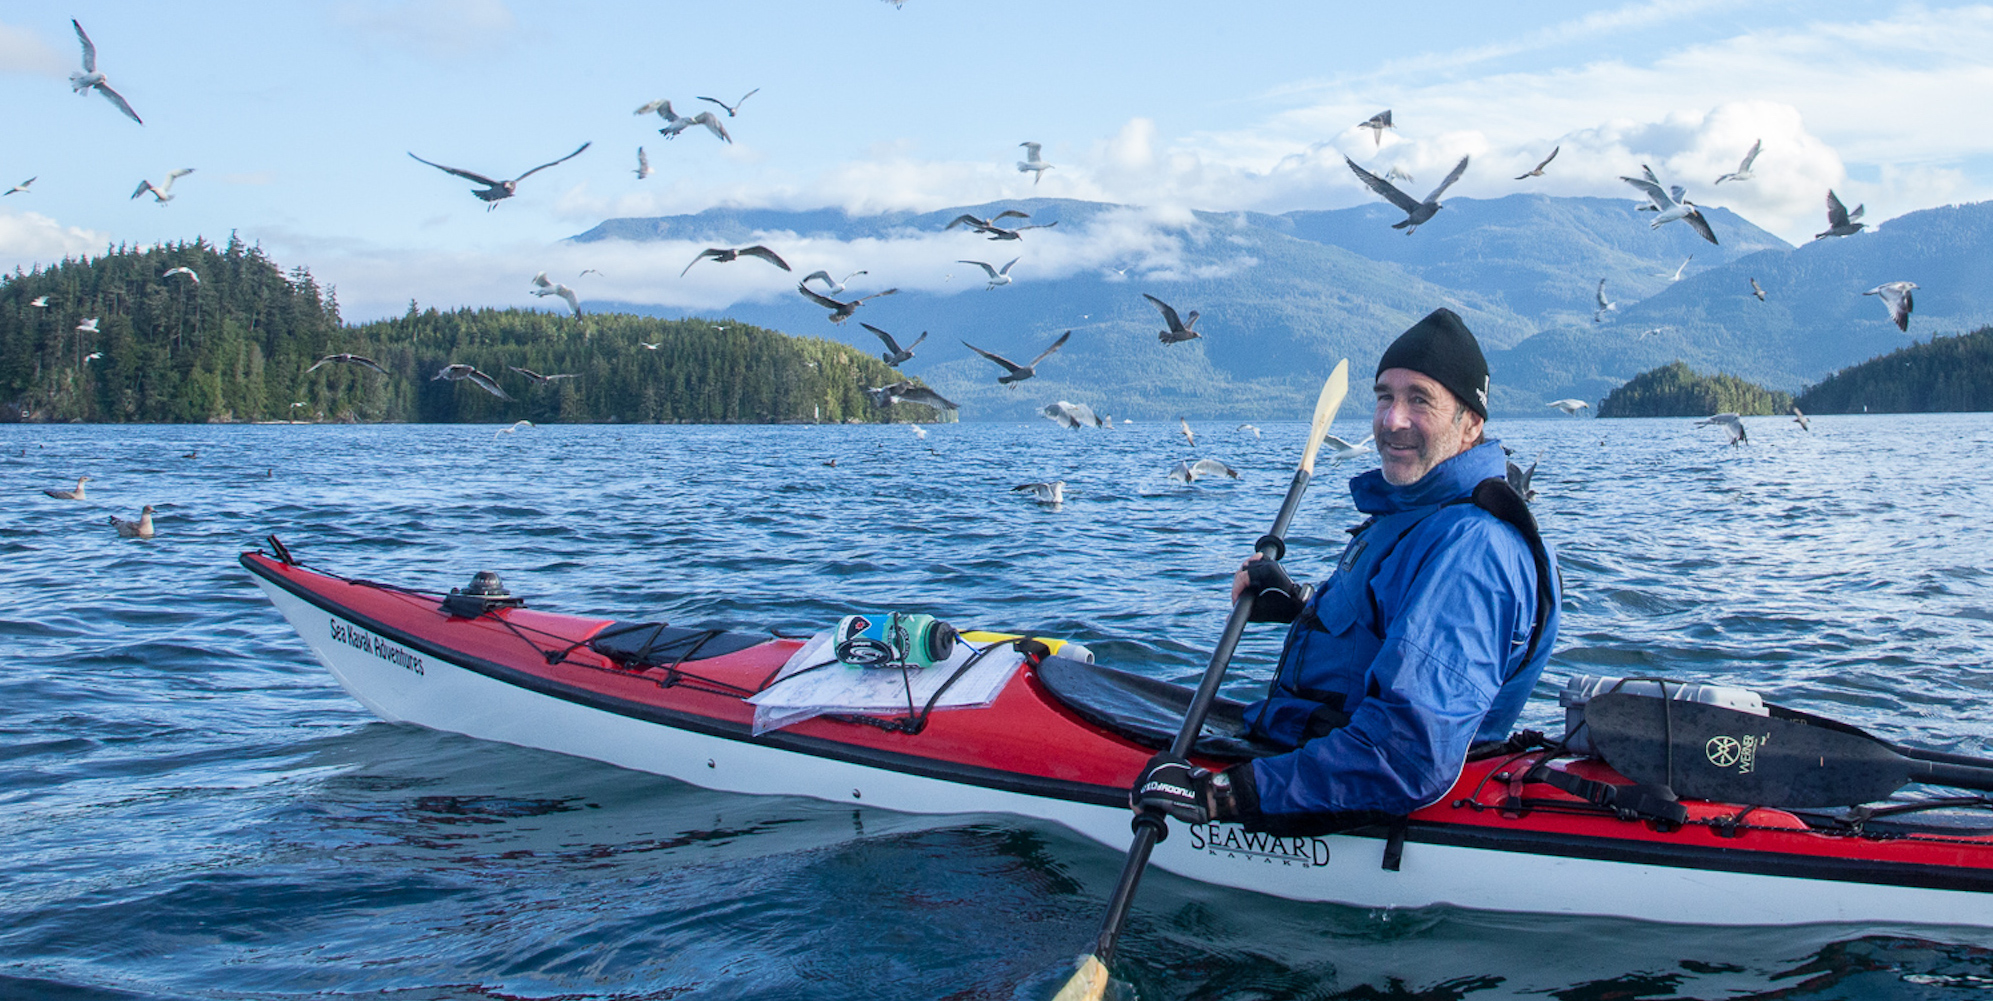 A man in a single red kayak with a blue dry top and black beanie smiling for the camera while a herd of birds fly overhead